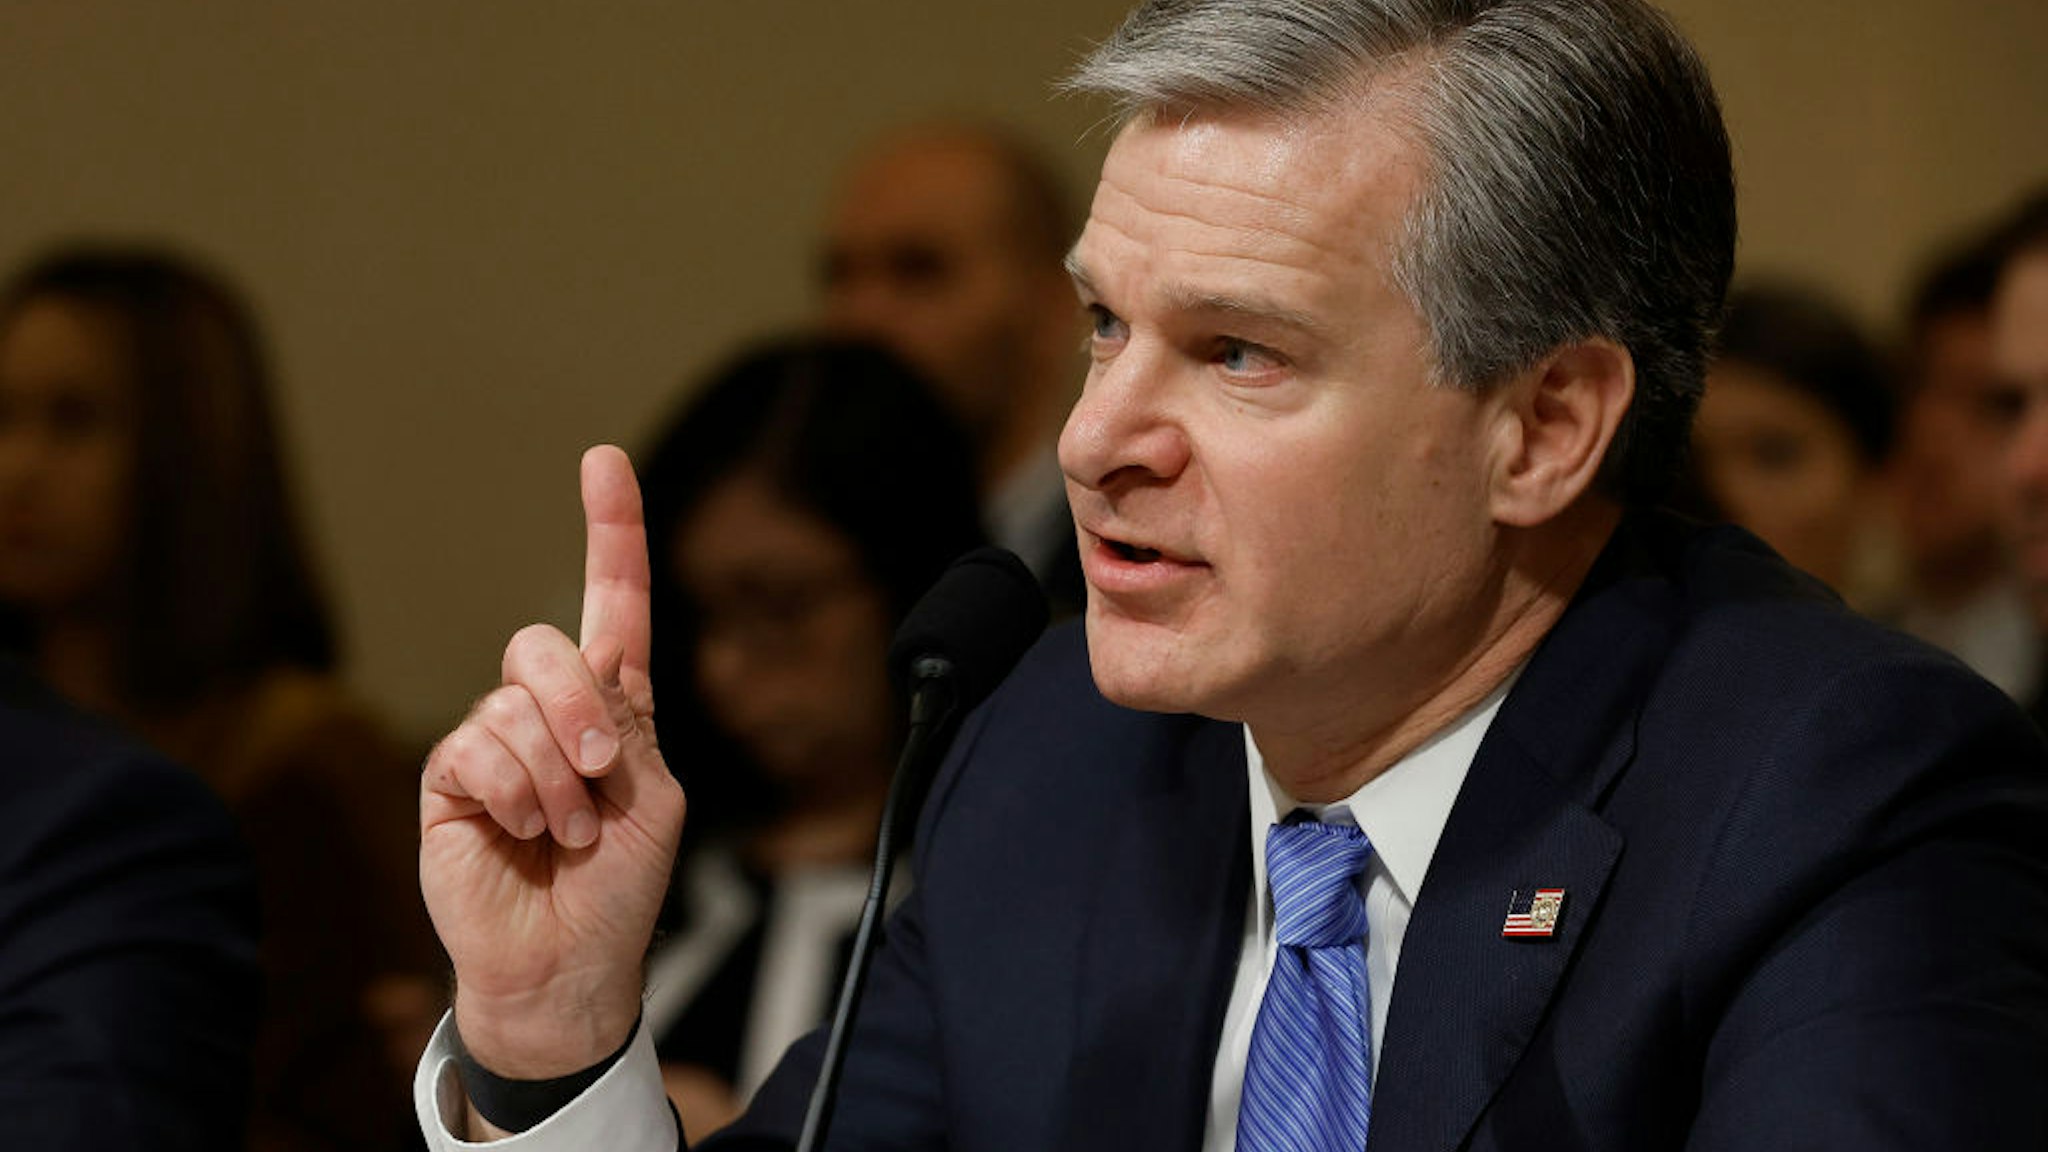 WASHINGTON, DC - NOVEMBER 15: Federal Bureau of Investigation Director Christopher Wray prepares to testify before the House Homeland Security Committee in the Cannon House Office Building on Capitol Hill on November 15, 2022 in Washington, DC. Wray, Homeland Security Secretary Alejandro Mayorkas and National Counterterrorism Center Director Christine Abizaid testified about the current threat level against the United States, including both physical and cyber attacks. (Photo by Chip Somodevilla/Getty Images)